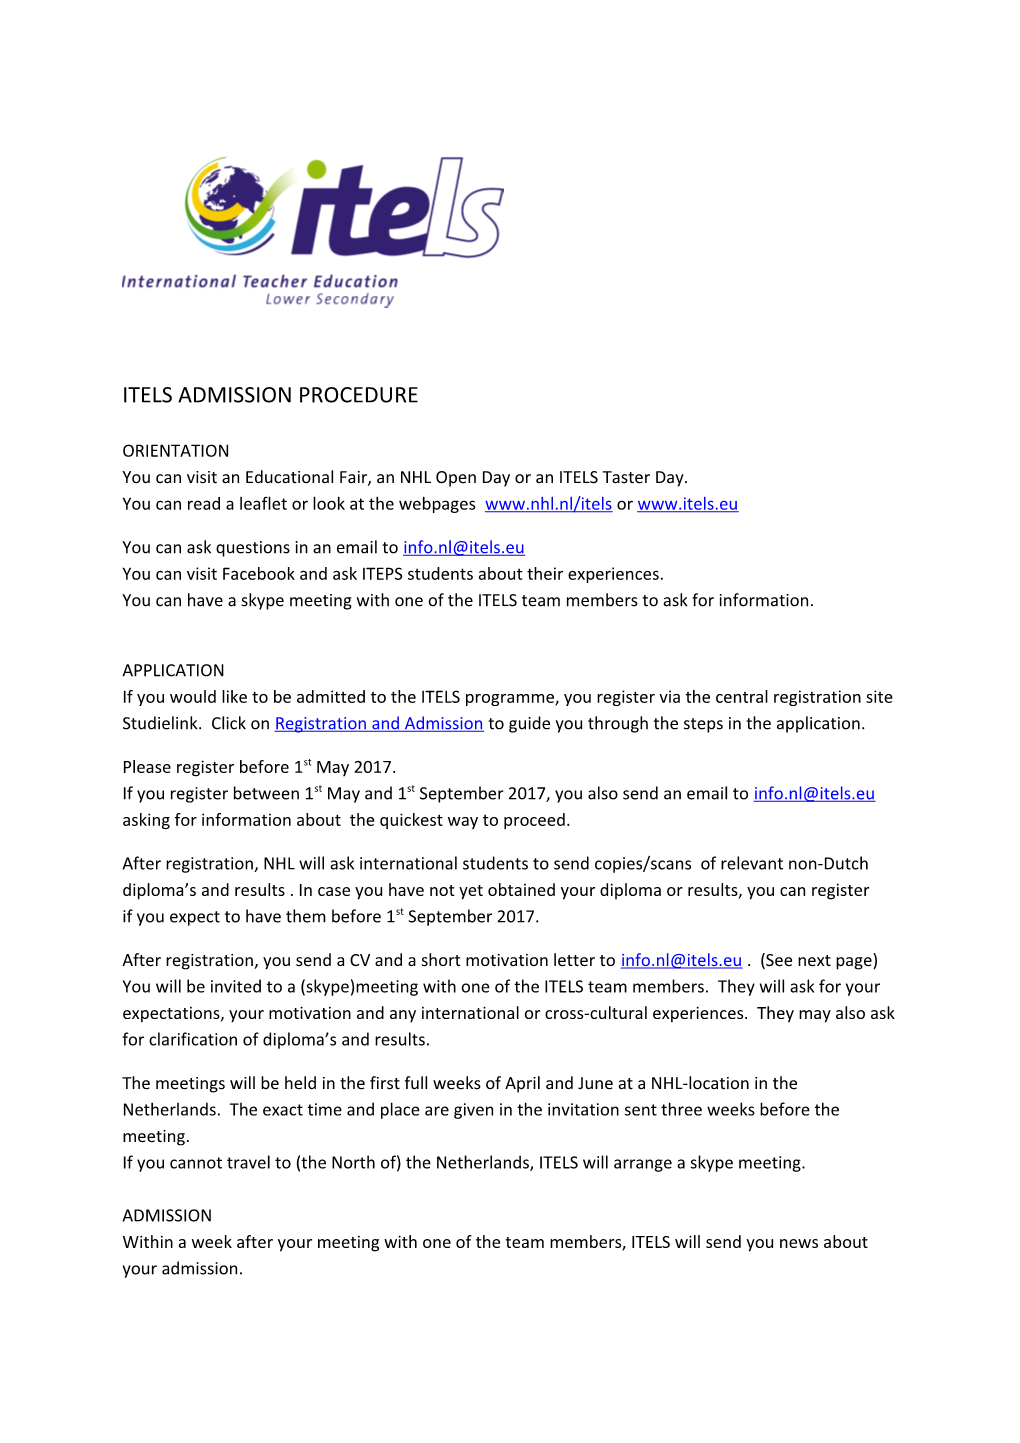 ITELS ADMISSION PROCEDURE ORIENTATION You Can Visit an Educational Fair, an NHL Open Day